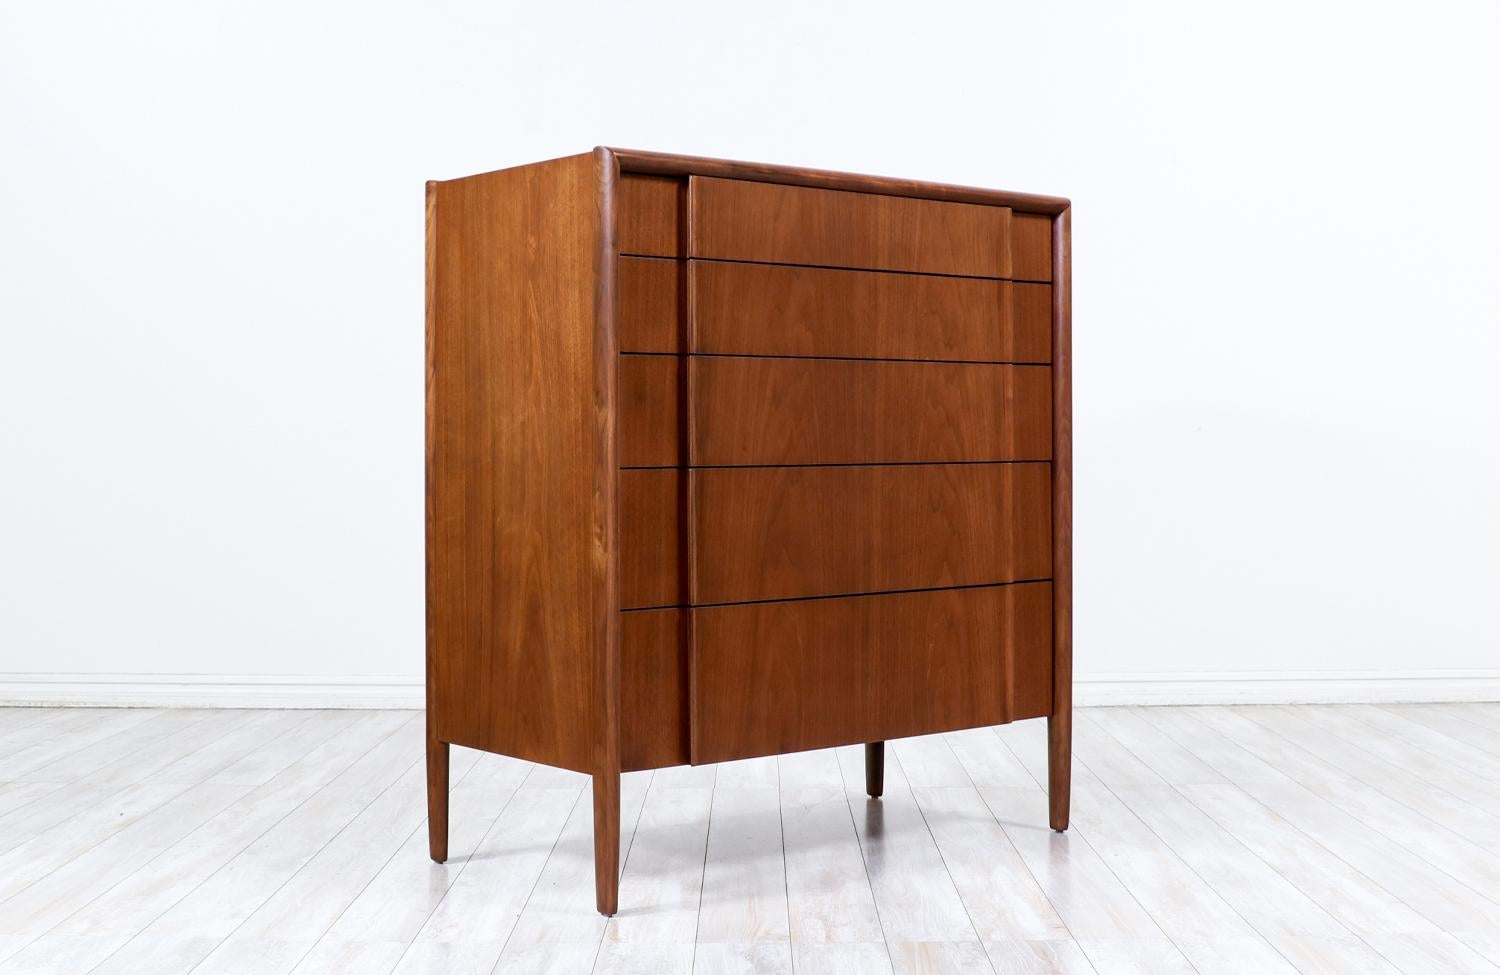 Barney Flagg Walnut Chest of Drawer Dresser for Drexel

________________________________________

Transforming a piece of Mid-Century Modern furniture is like bringing history back to life, and we take this journey with passion and precision. With